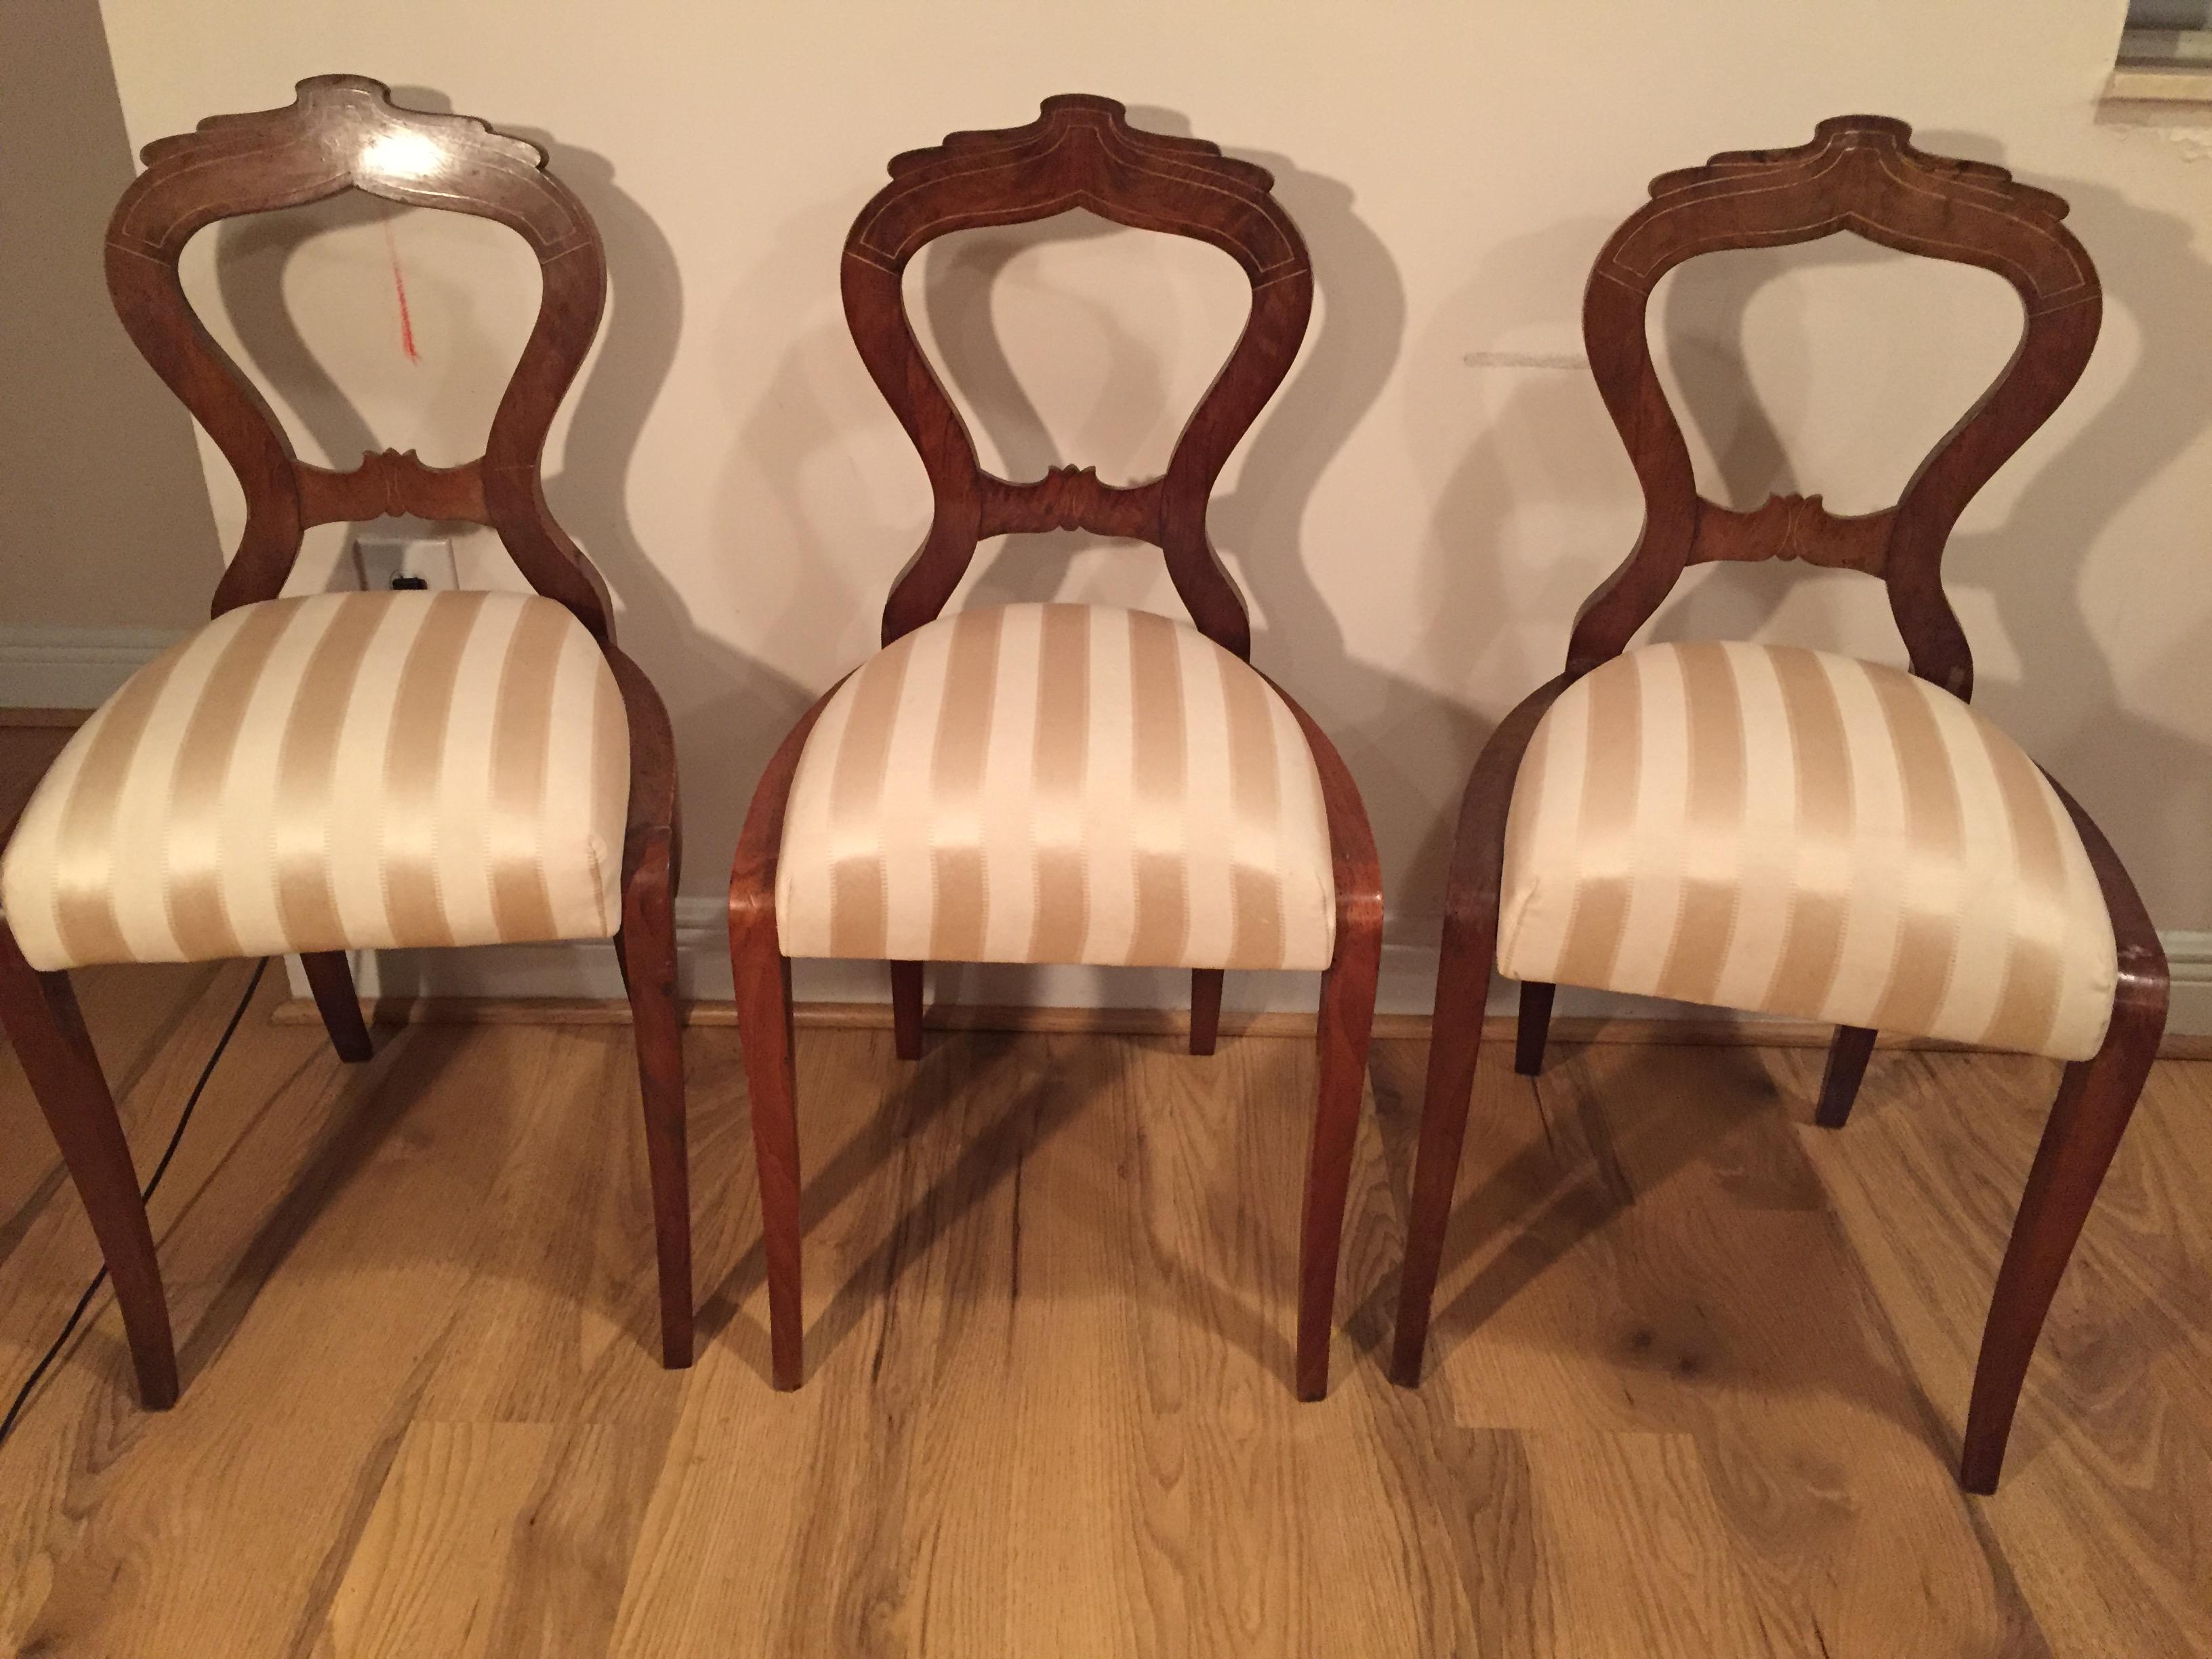 Elegant set of Biedermeier 1820 Viennese 6 pcs dining chairs with intarsia attributed to Danhausser.